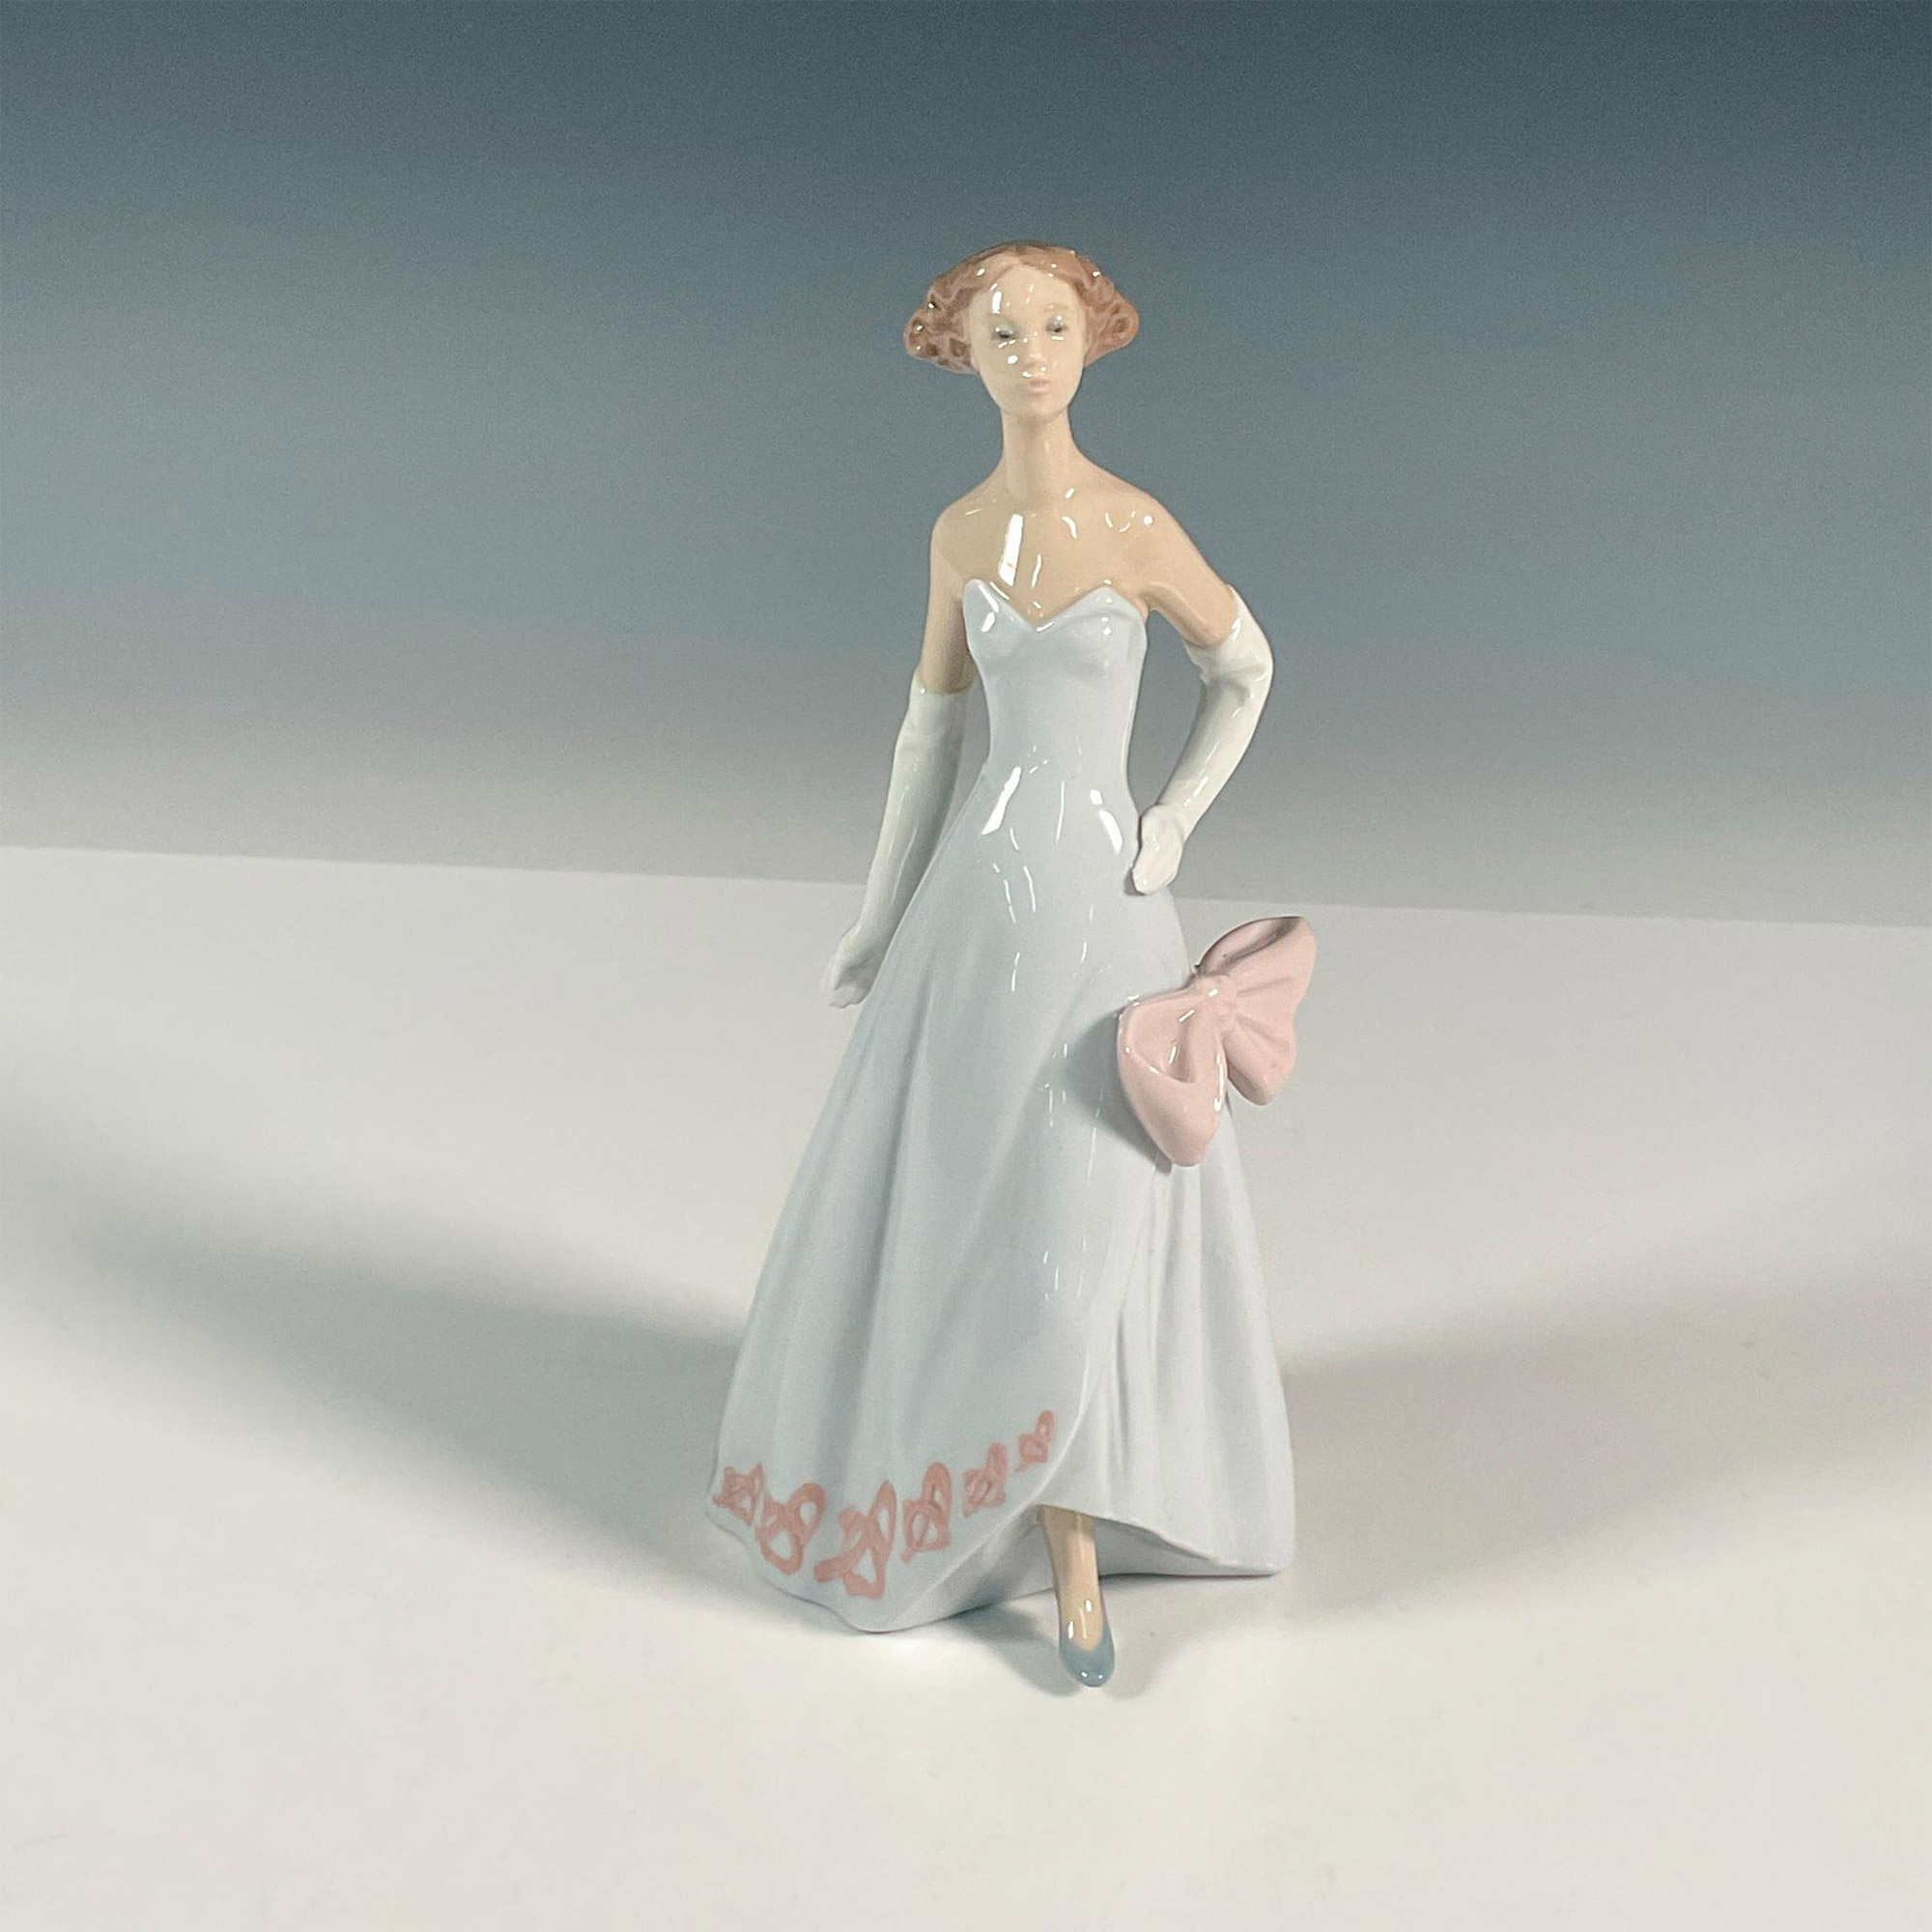 On The Runway 1006595 - Lladro Porcelain Figurine - Image 2 of 5